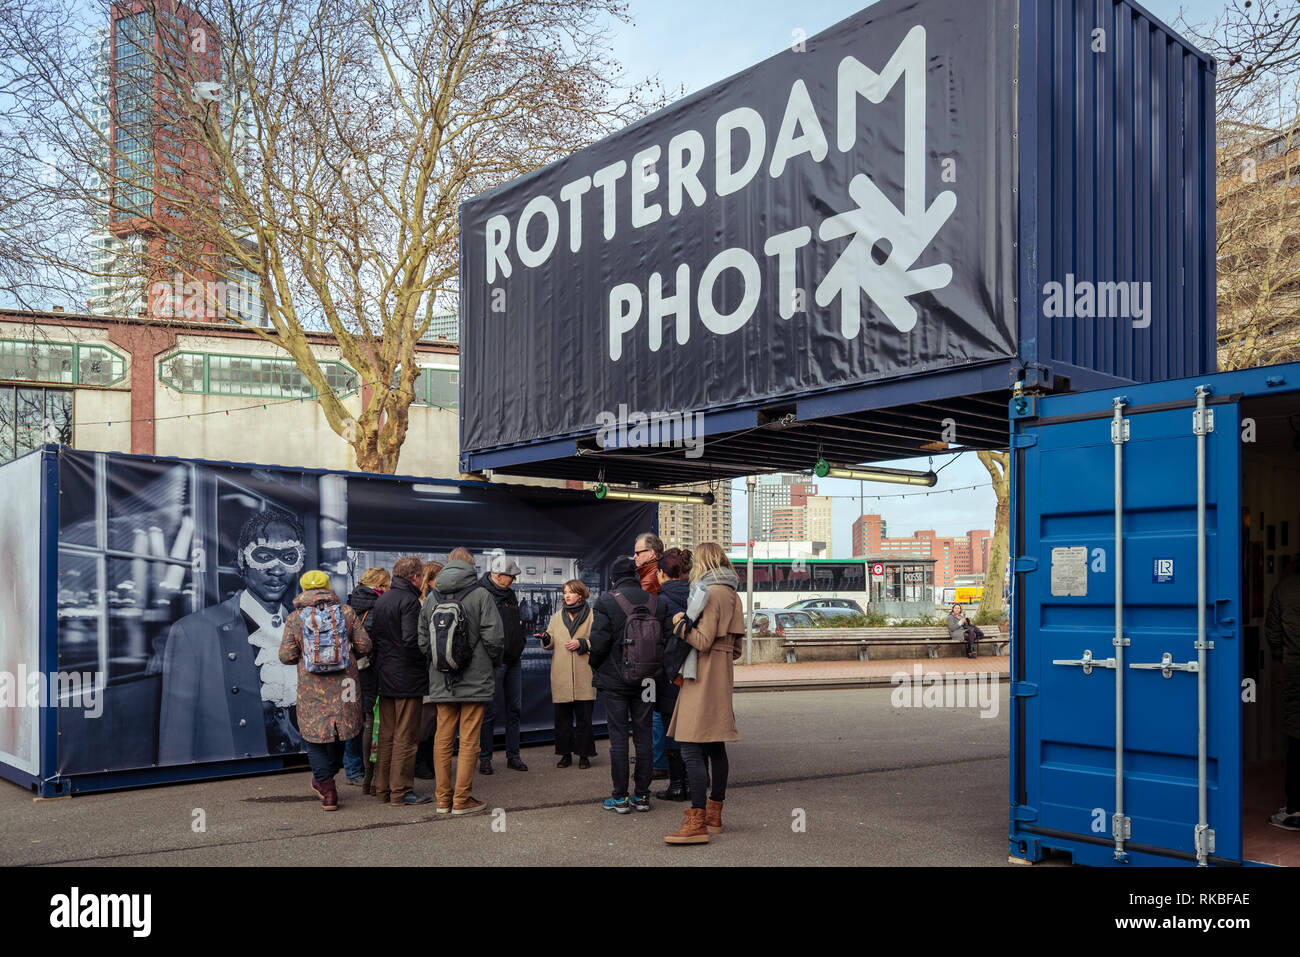 Rotterdam, Netherlands - February 9, 2019: Photo exhibition held in sea containers on Deliplein in Katendrecht during Art Rotterdam Week Stock Photo